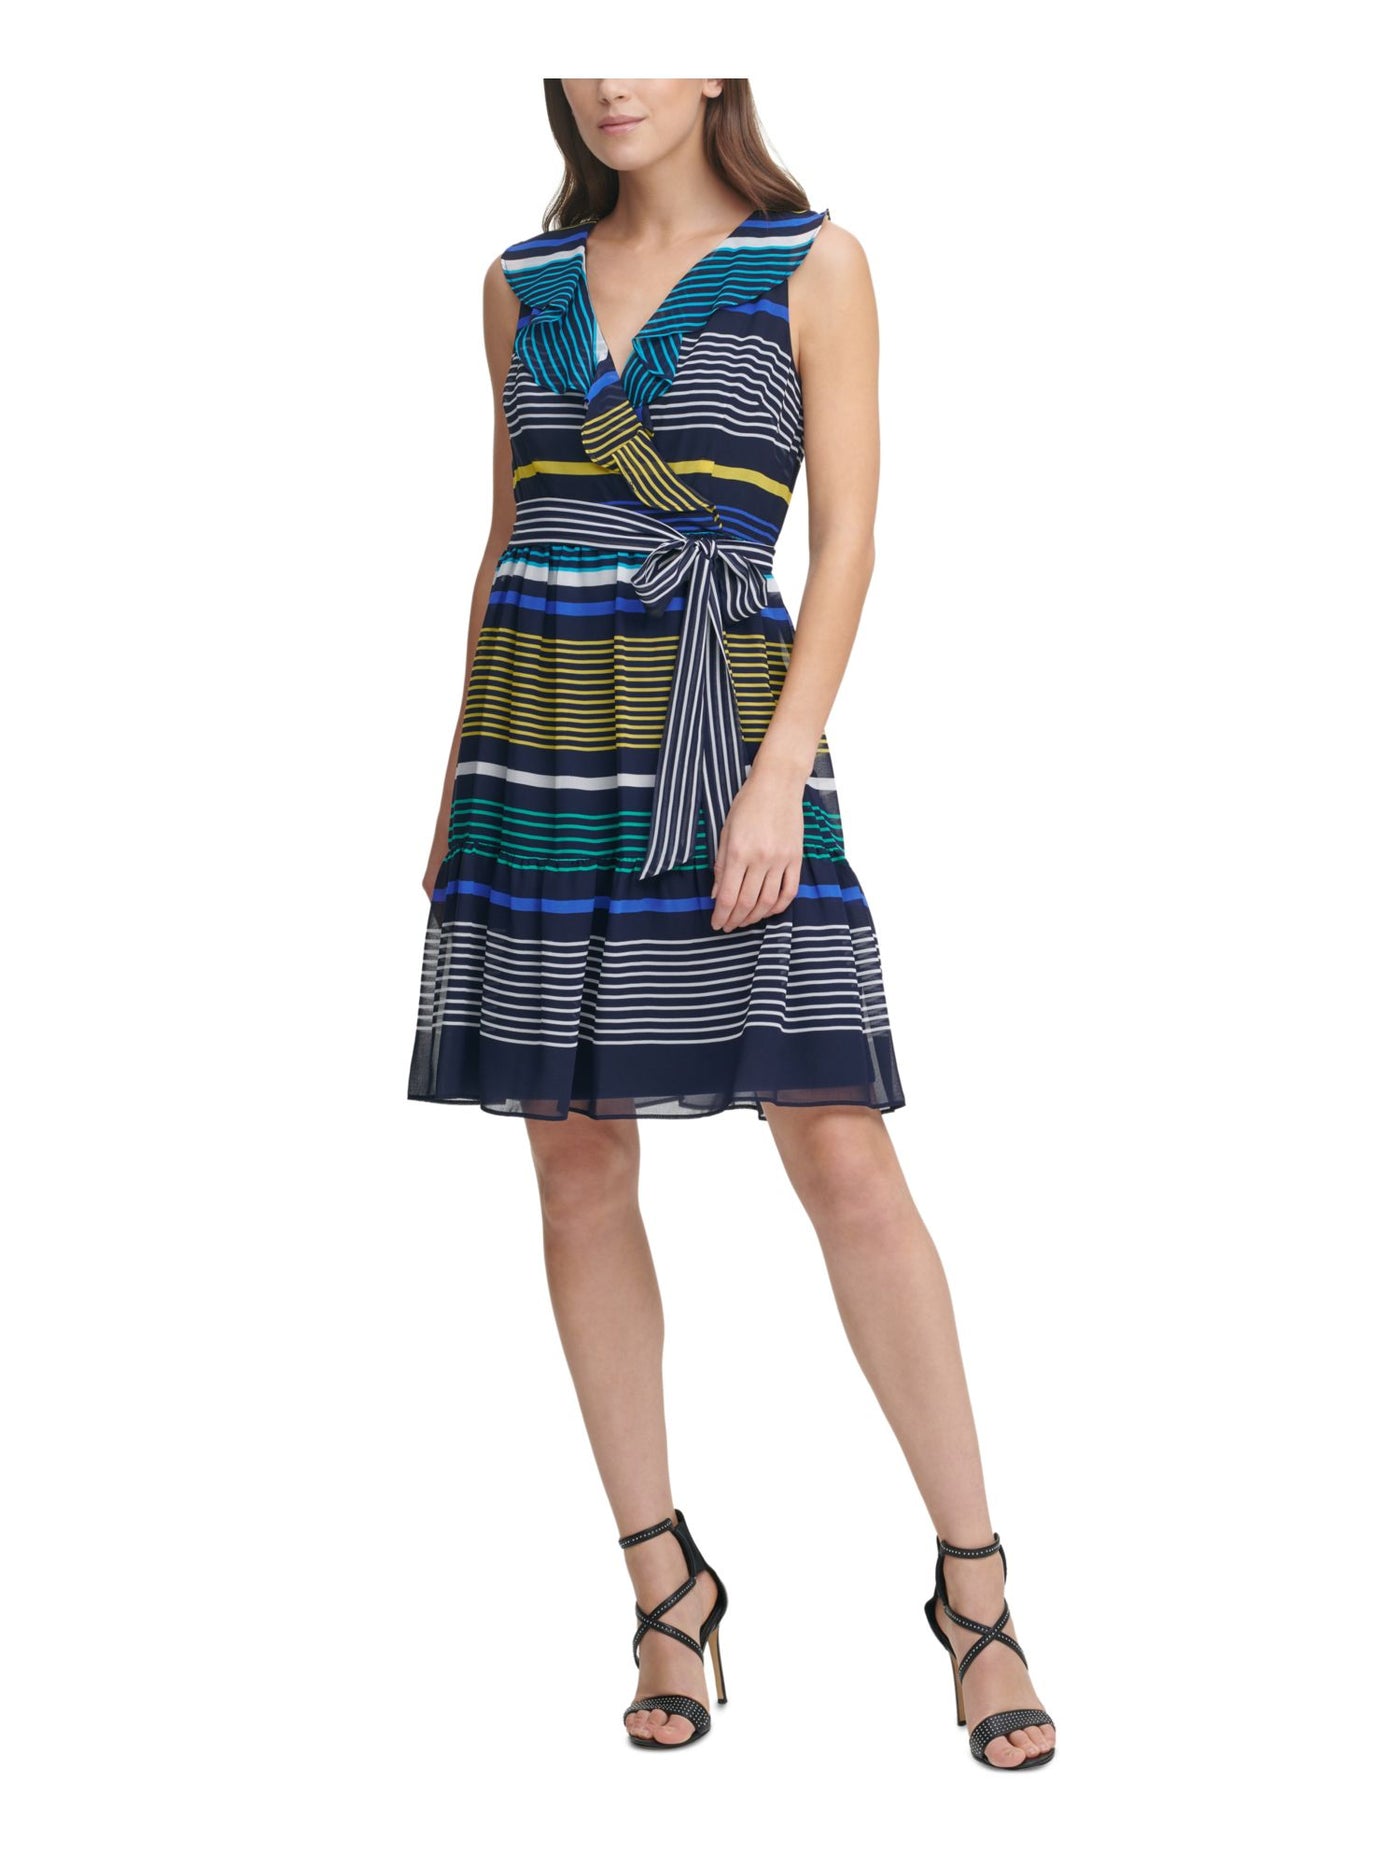 DKNY Womens Navy Ruffled Zippered Belted Lined Striped Sleeveless Surplice Neckline Above The Knee Wear To Work Fit + Flare Dress 2